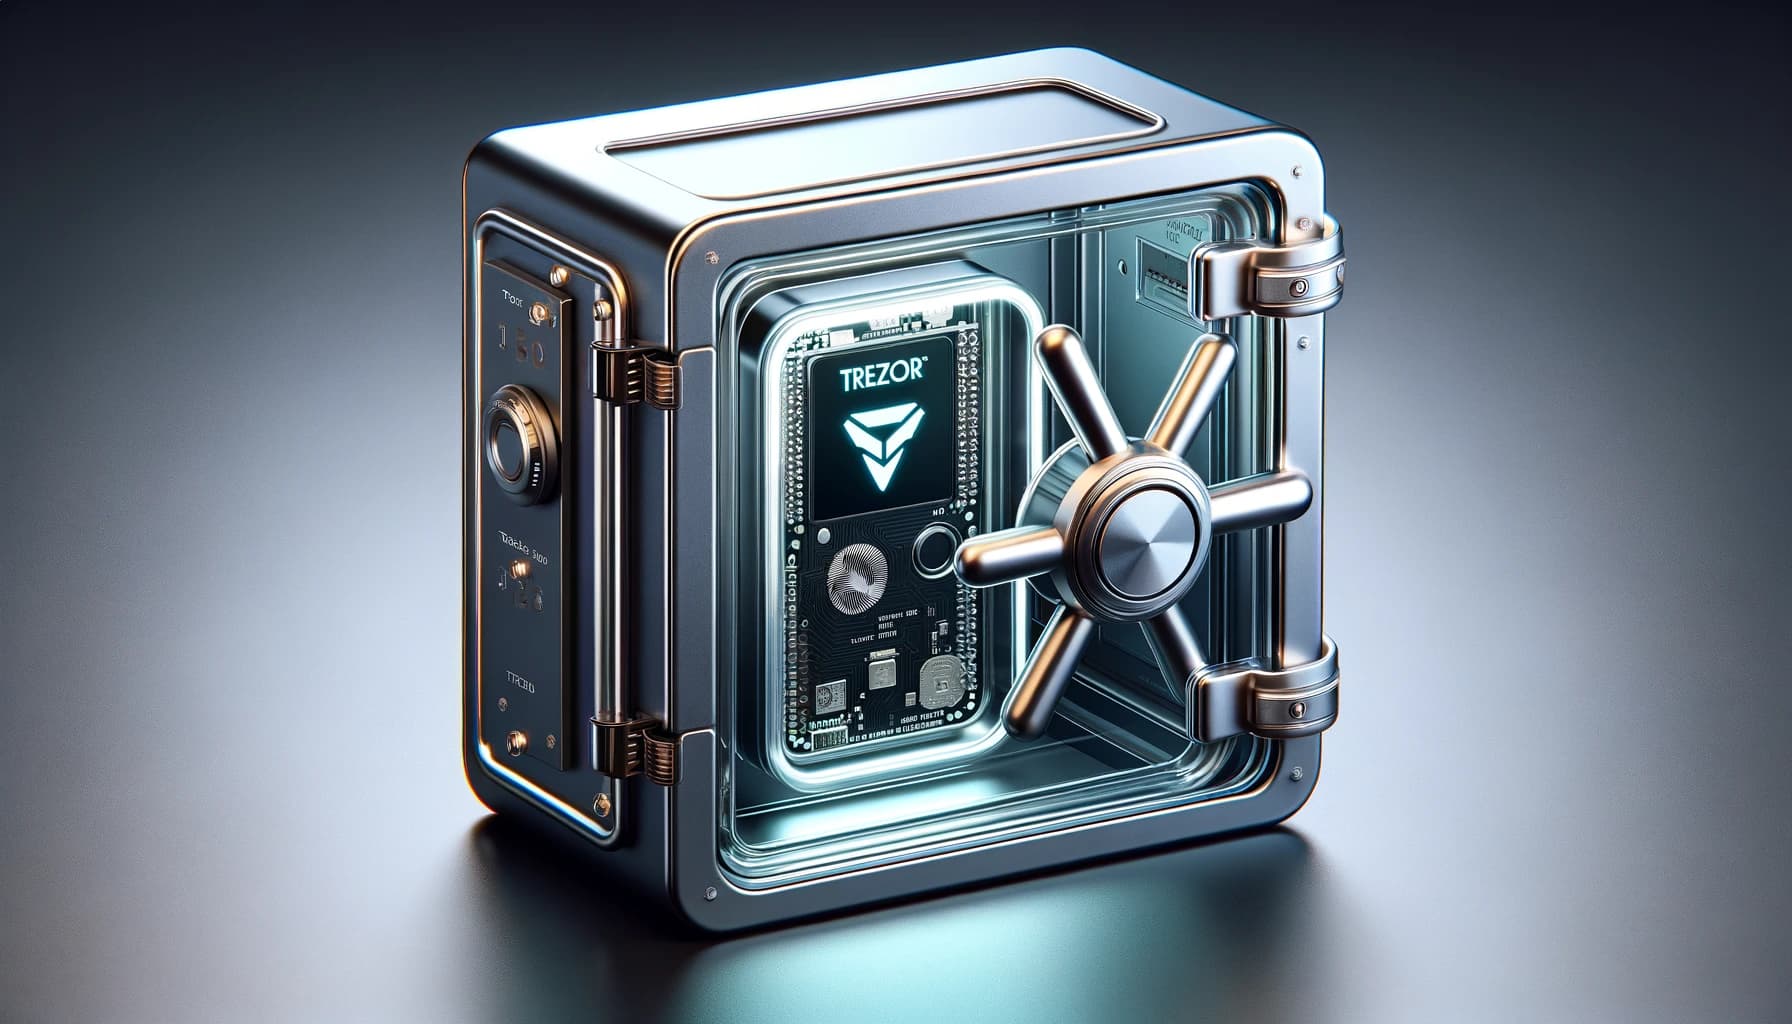 Bucket Technologies image showing a Bitcoin wallet protected in a clear safe like looking fixture complete with a rotary mechanism to lock/unlock the door.